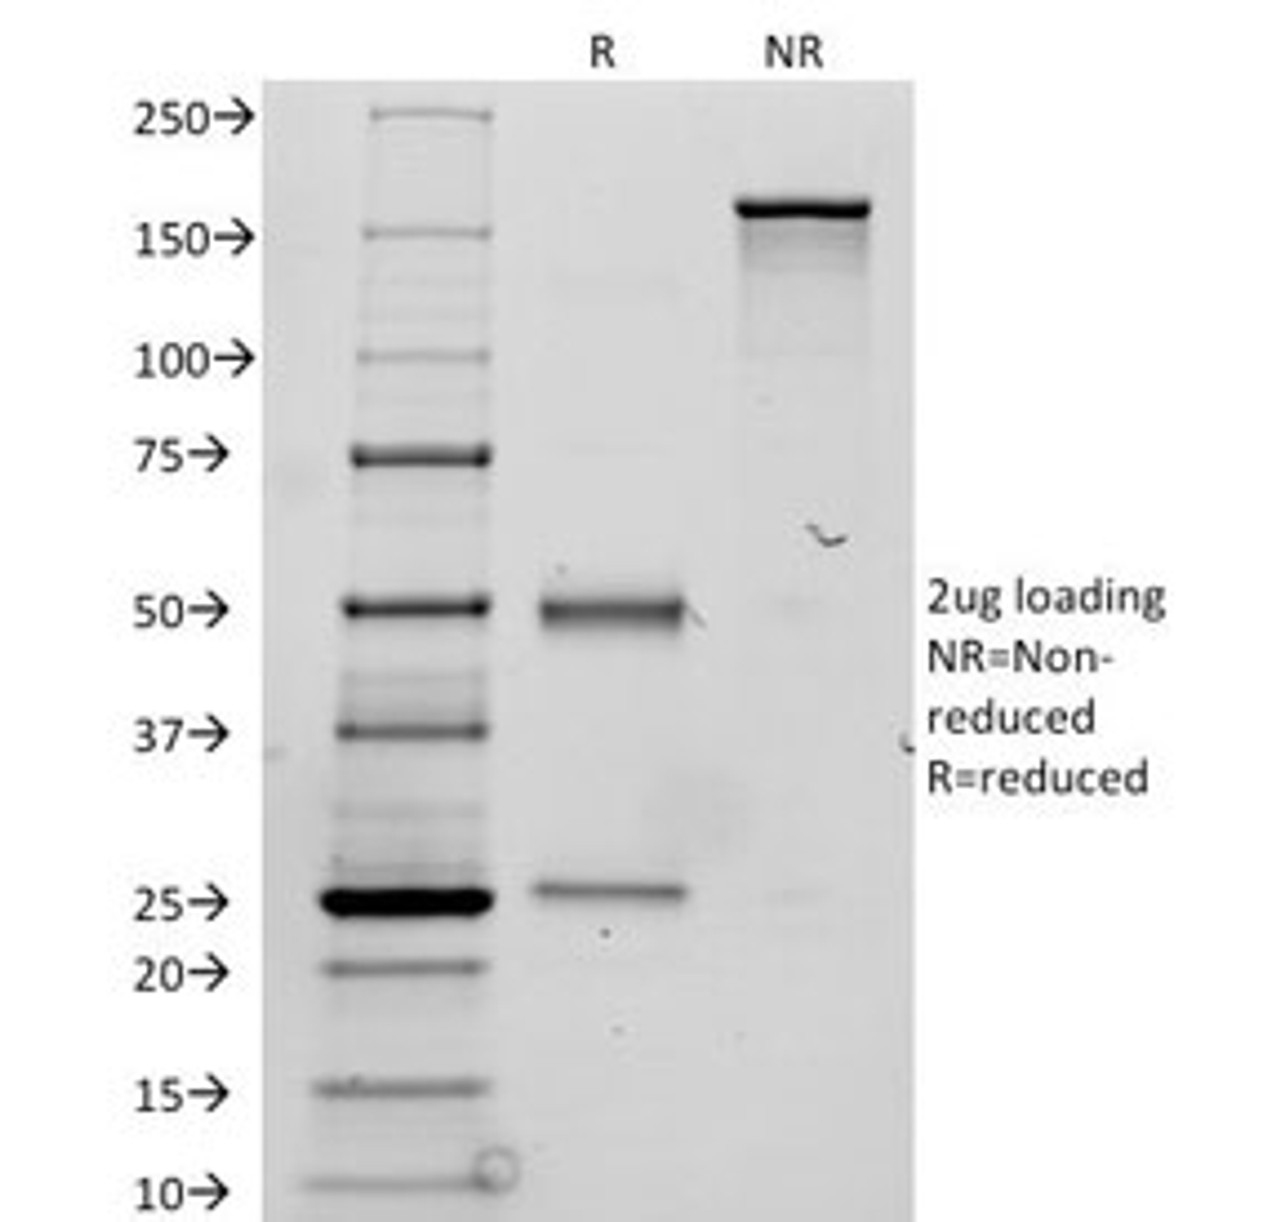 SDS-PAGE Analysis of Purified, BSA-Free TG Antibody (clone TGB24) . Confirmation of Integrity and Purity of the Antibody.